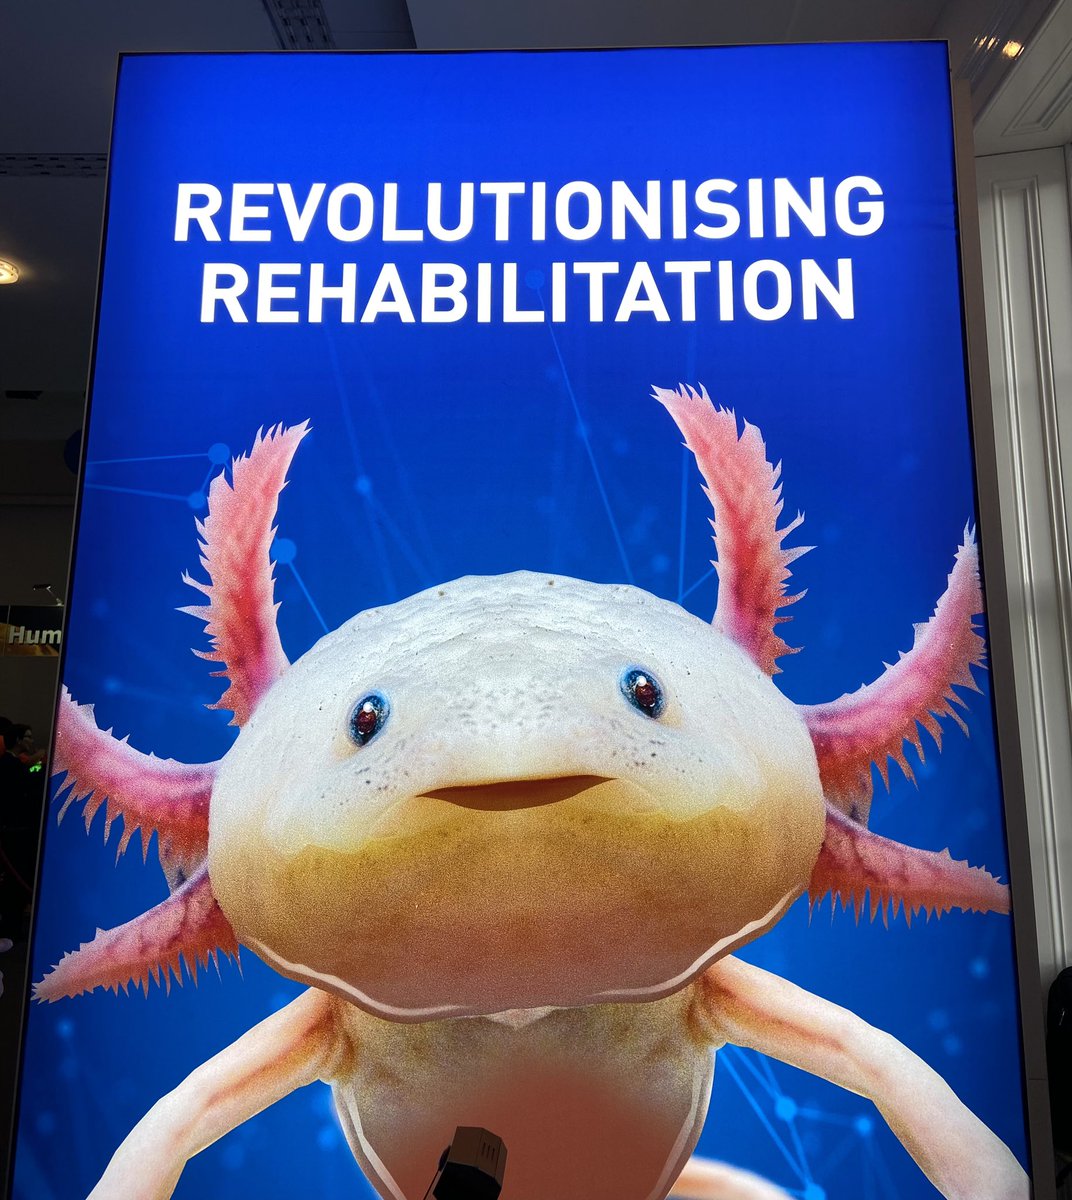 Got in early to beat the crowds @royalsociety #SummerScience and see the Revolutionising Rehabilitation exhibit, great work @AnnaJLeather and colleagues @NRCrehabUK @lborouniversity 
@LboroSSEHS inspiring stuff and a stunning location